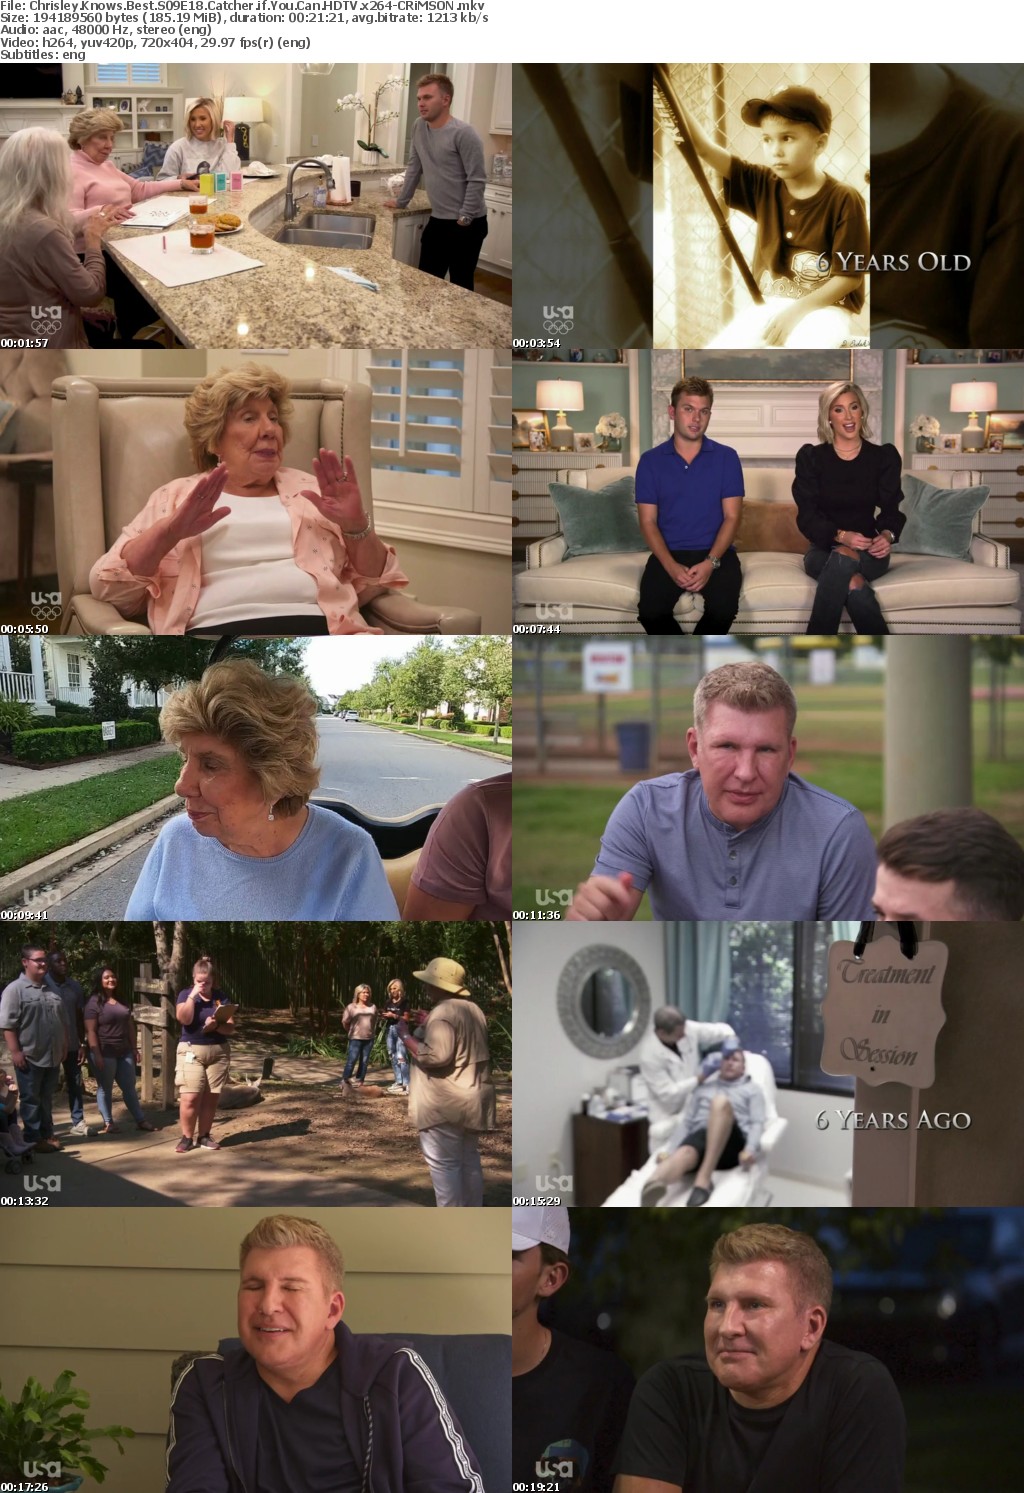 Chrisley Knows Best S09E18 Catcher if You Can HDTV x264-CRiMSON